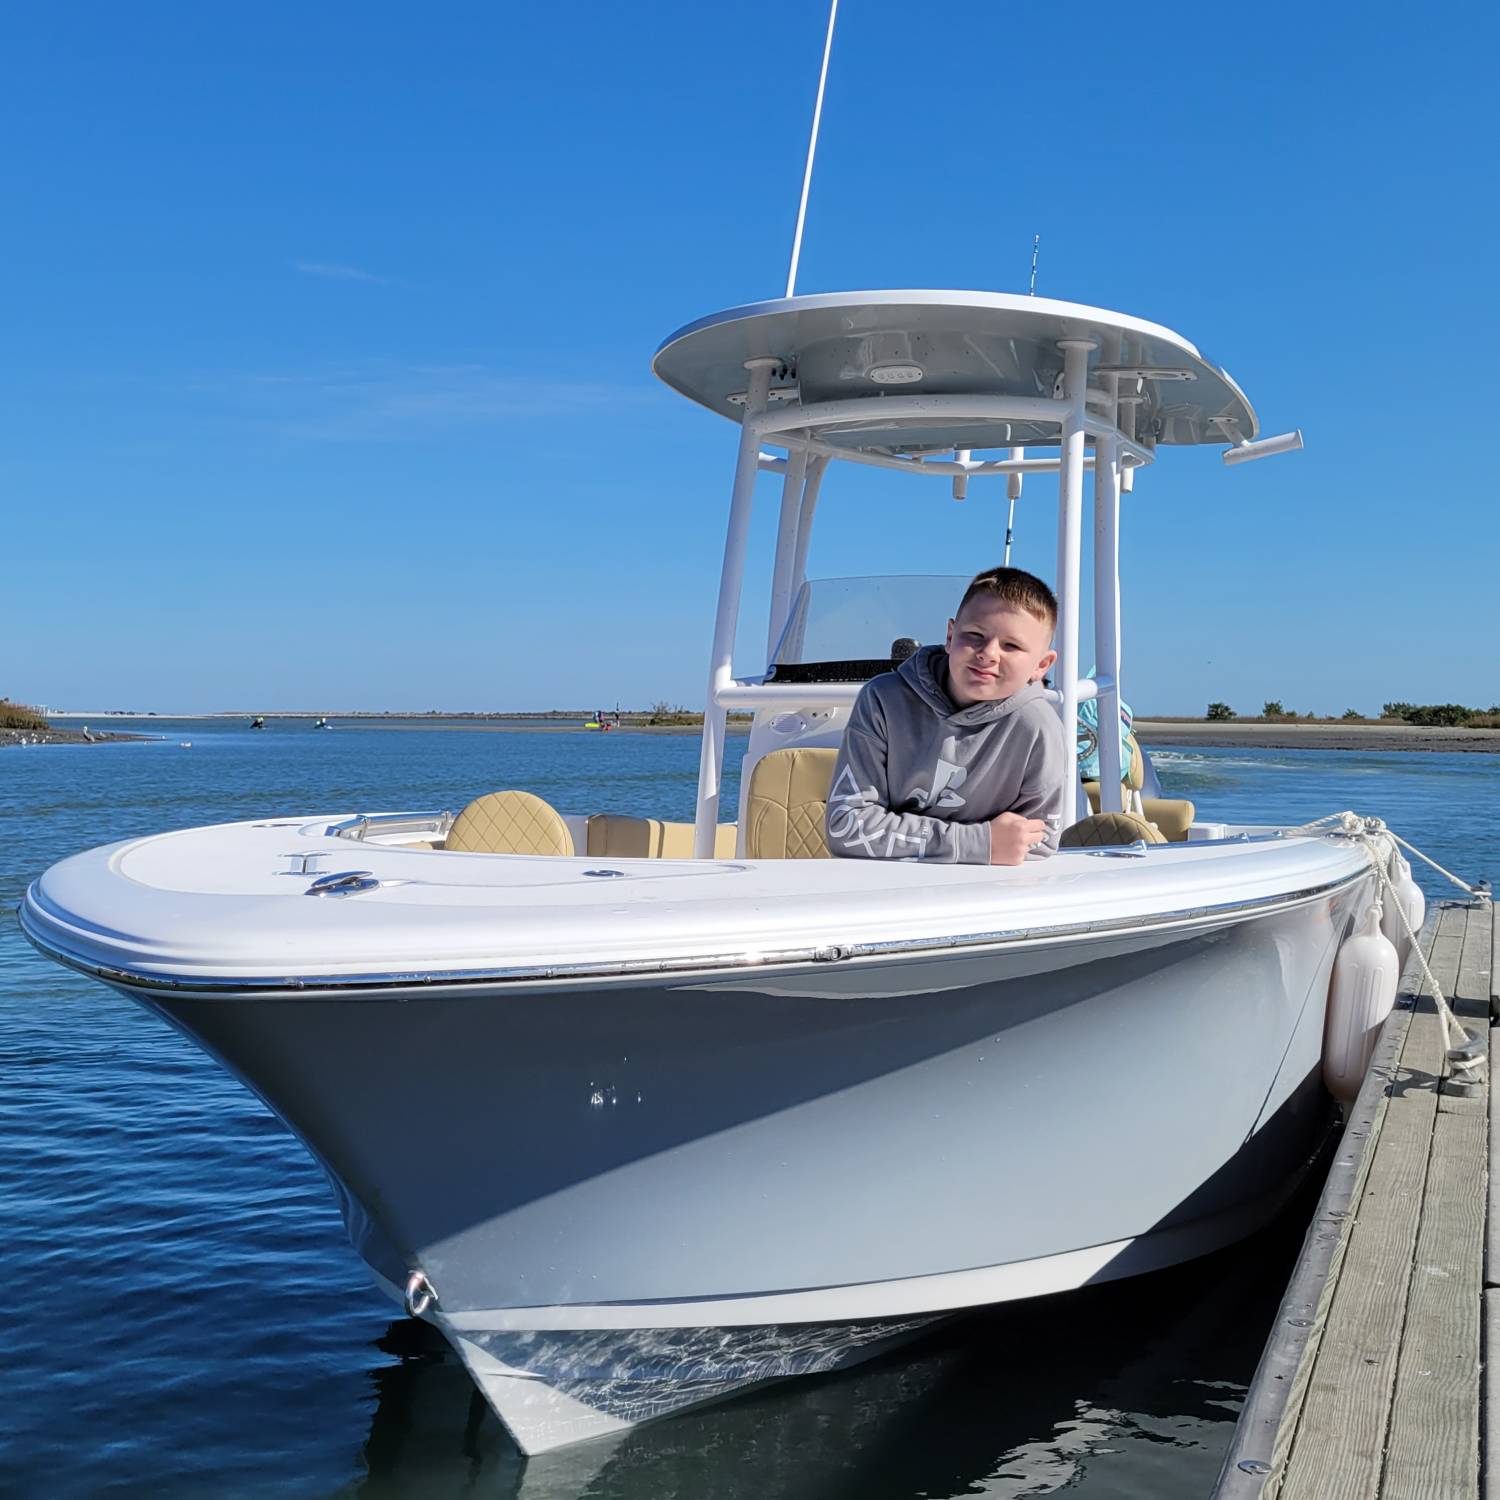 Title: Paradise Living - On board their Sportsman Open 232 Center Console - Location: St. Augustine, Florida. Participating in the Photo Contest #SportsmanMarch